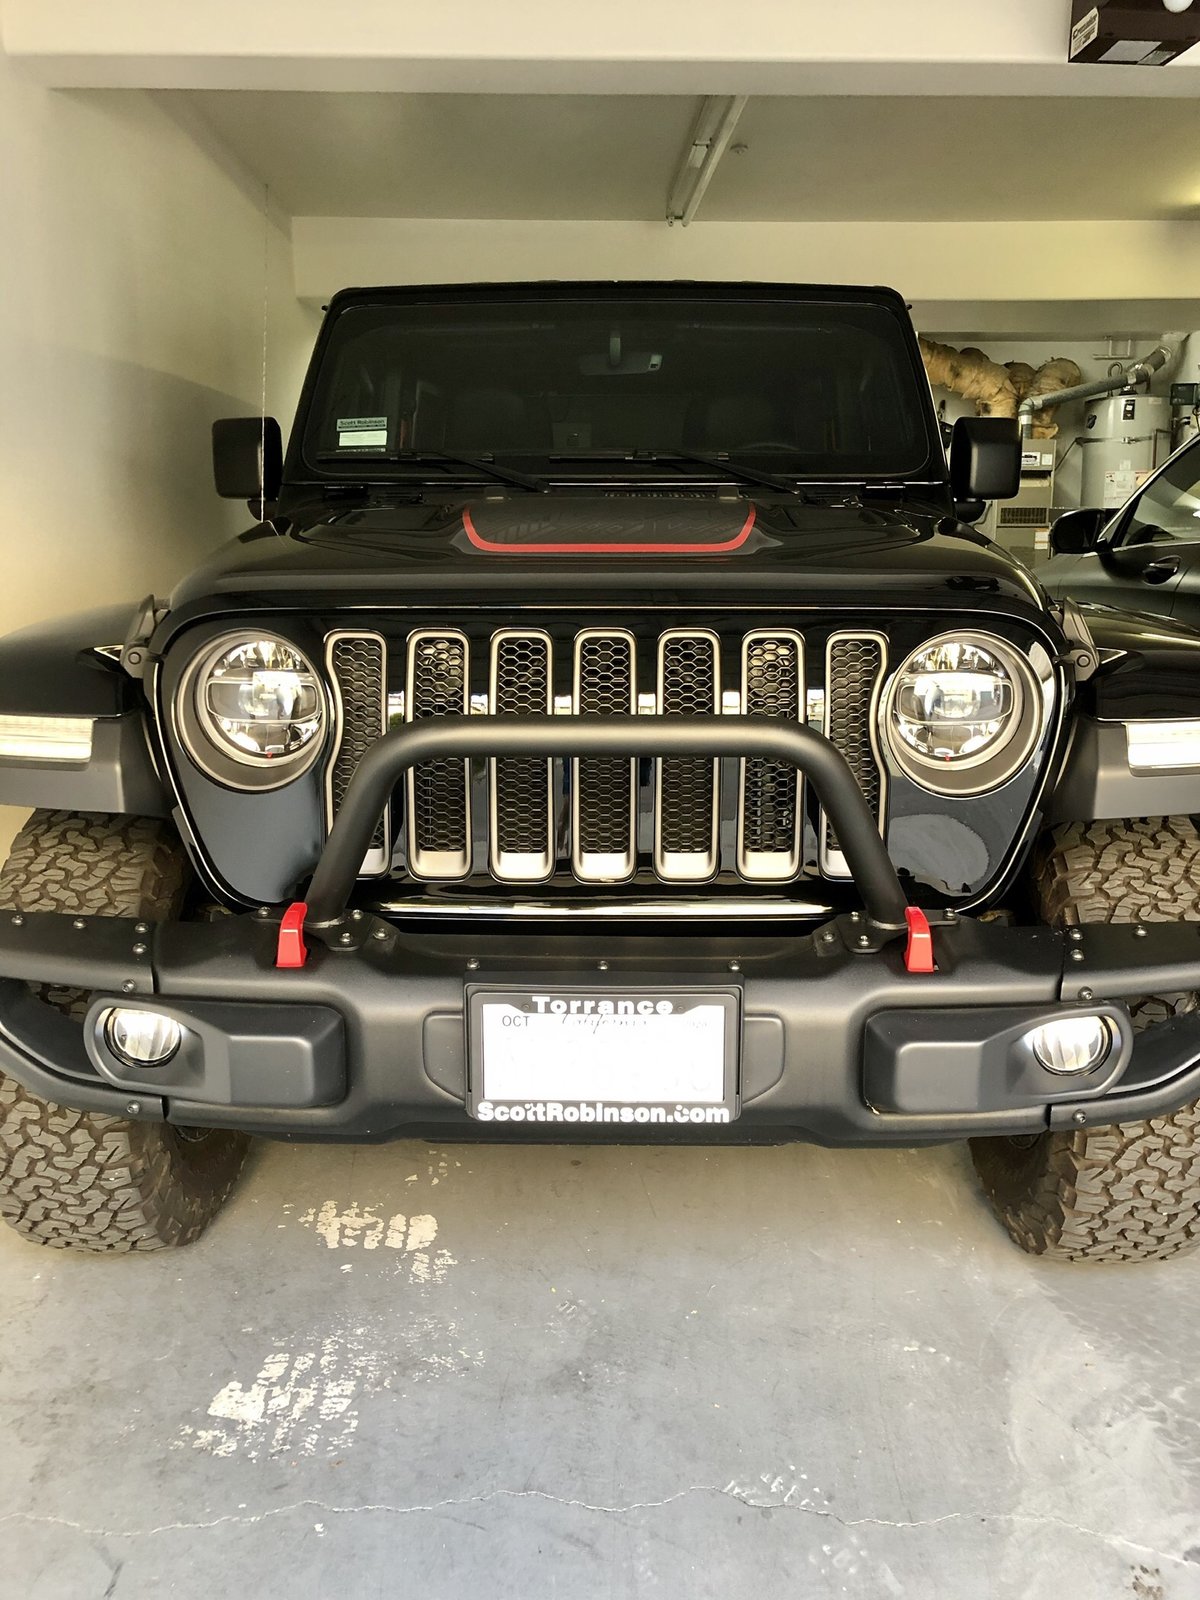 Installed: Warn Mid Height Grill Guard Tube (Factory steel bumper